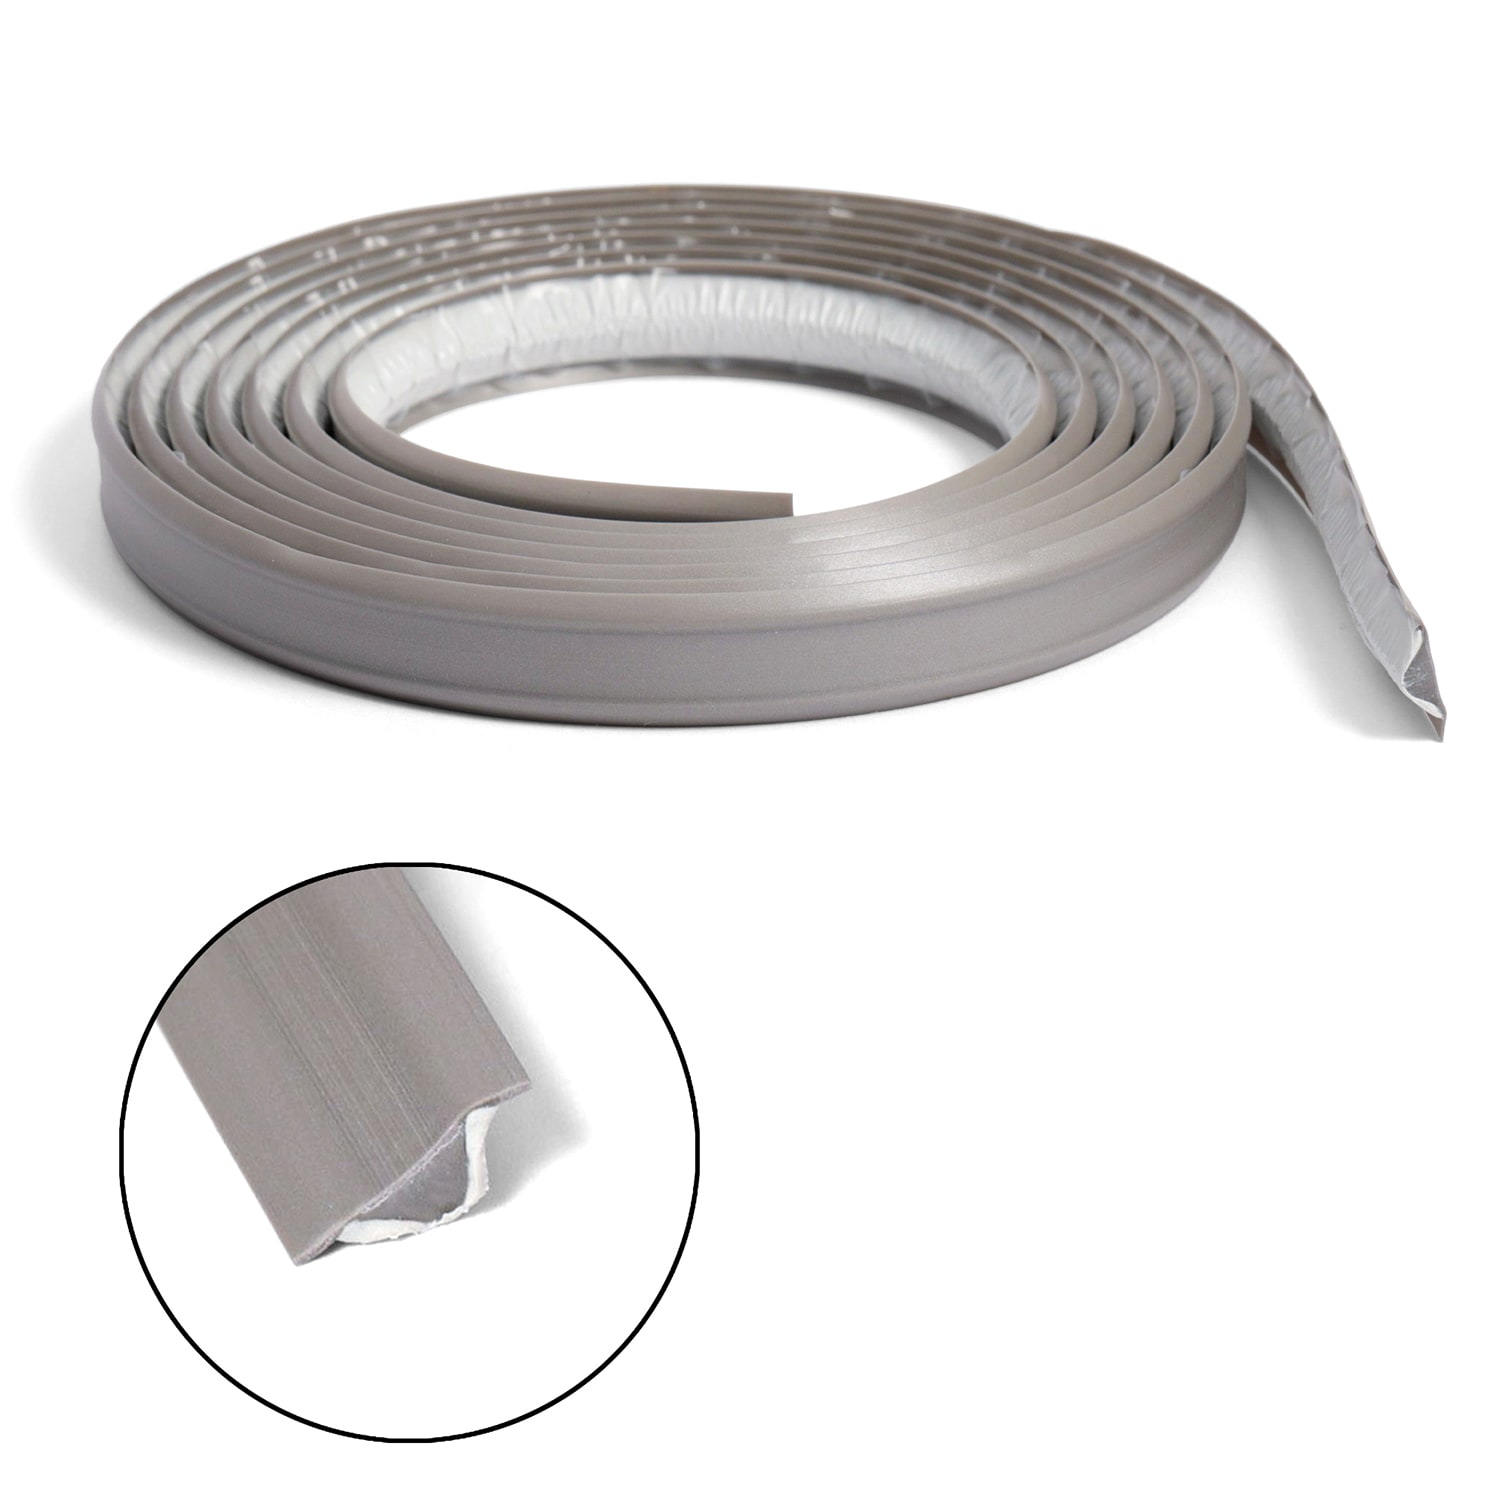 Self-adhesive silicone drip protection strip for shower and kitchen